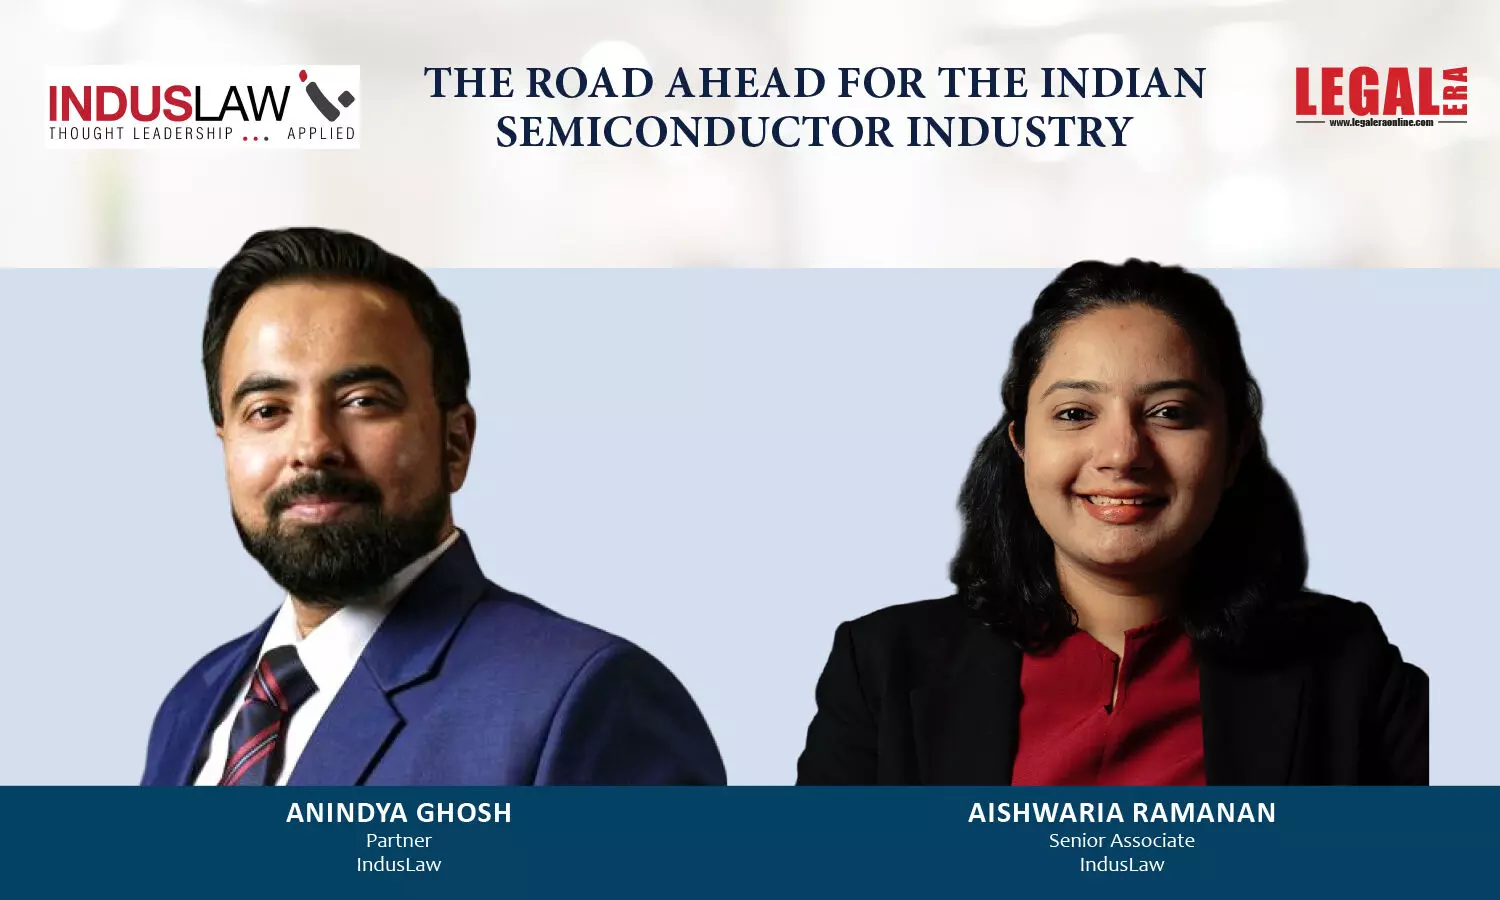 The Road Ahead For The Indian Semiconductor Industry